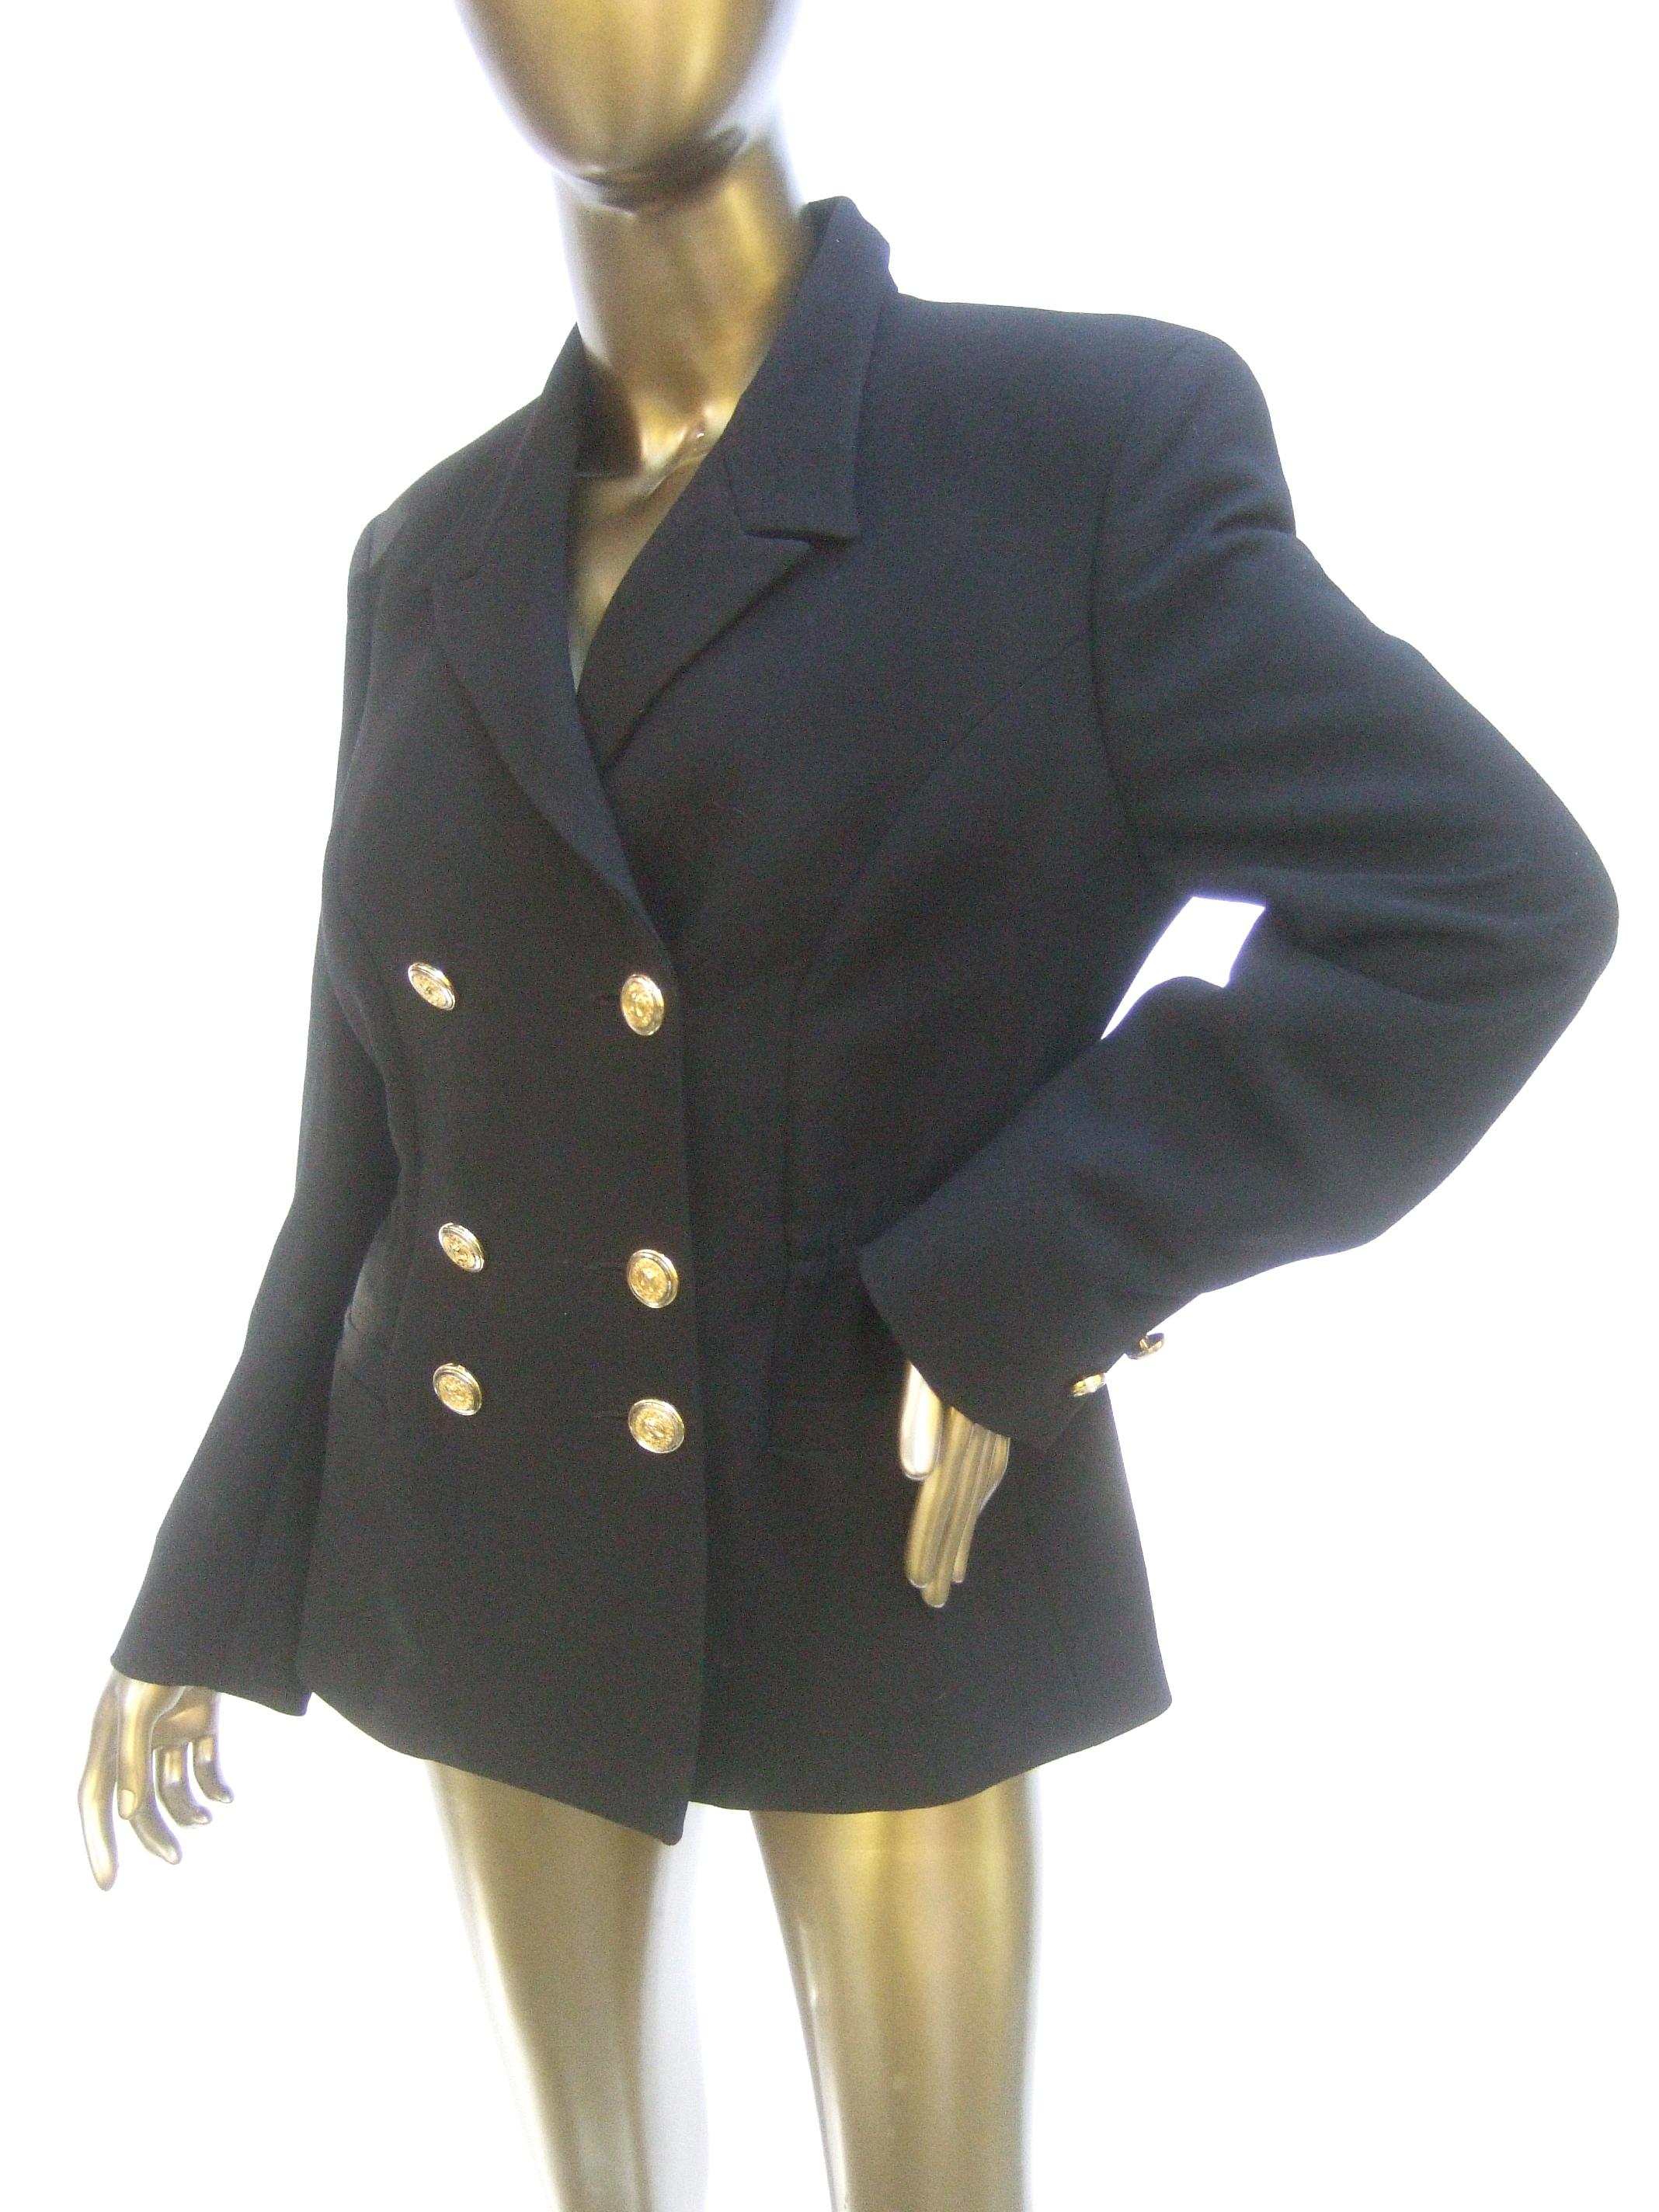 Versace Versus Black Wool Military Style Jacket Circa 1990s For Sale 3